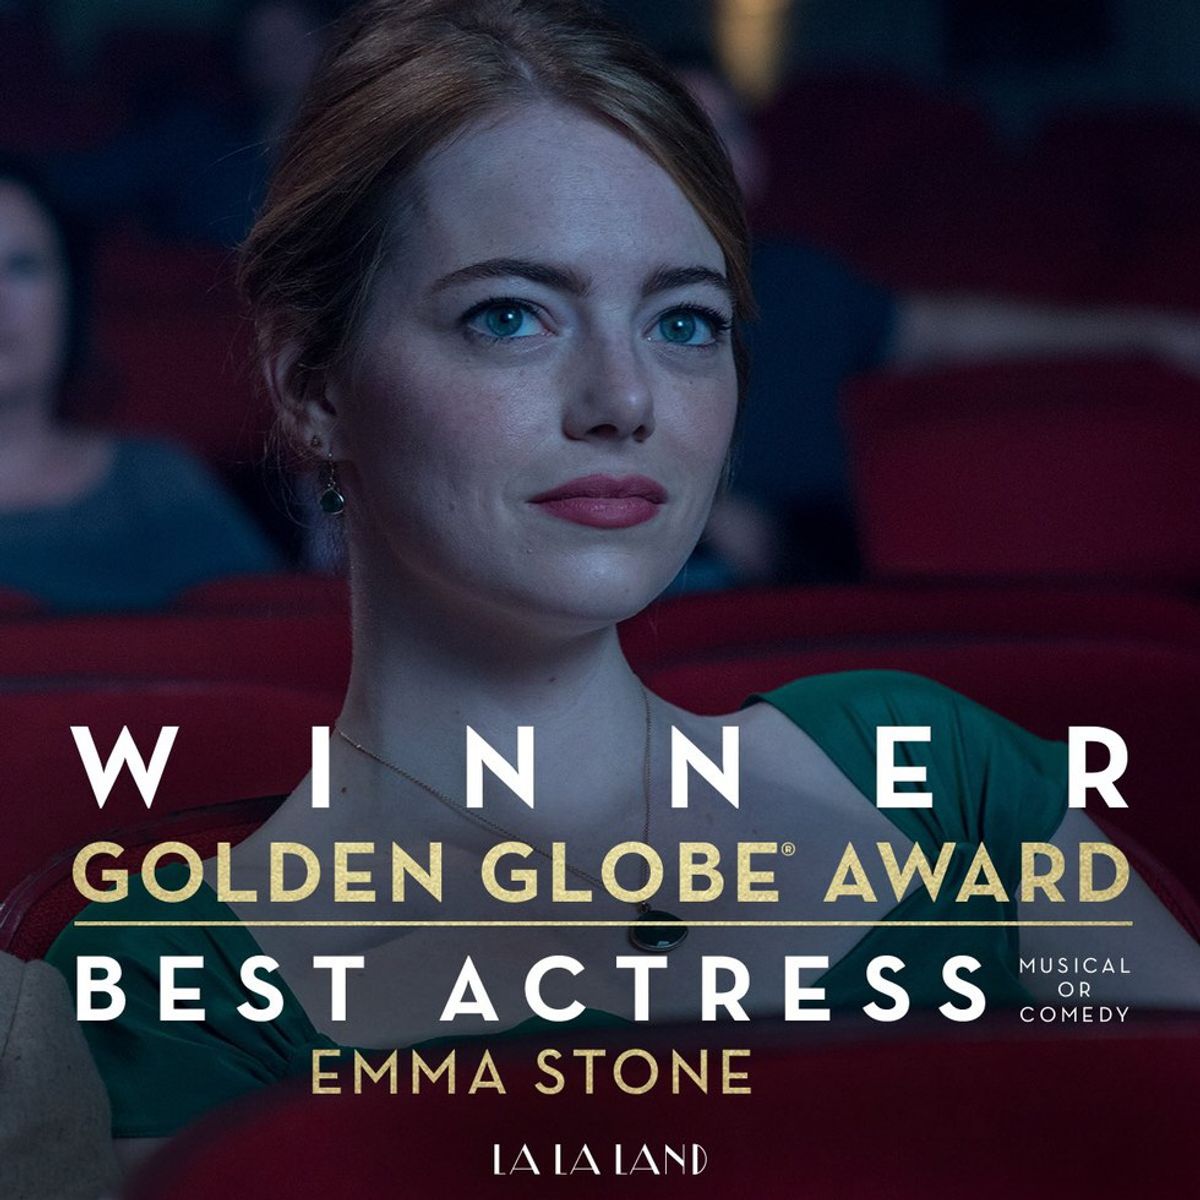 Emma Stone's Acceptance Speech Was the Highlight of This Year's Golden Globes